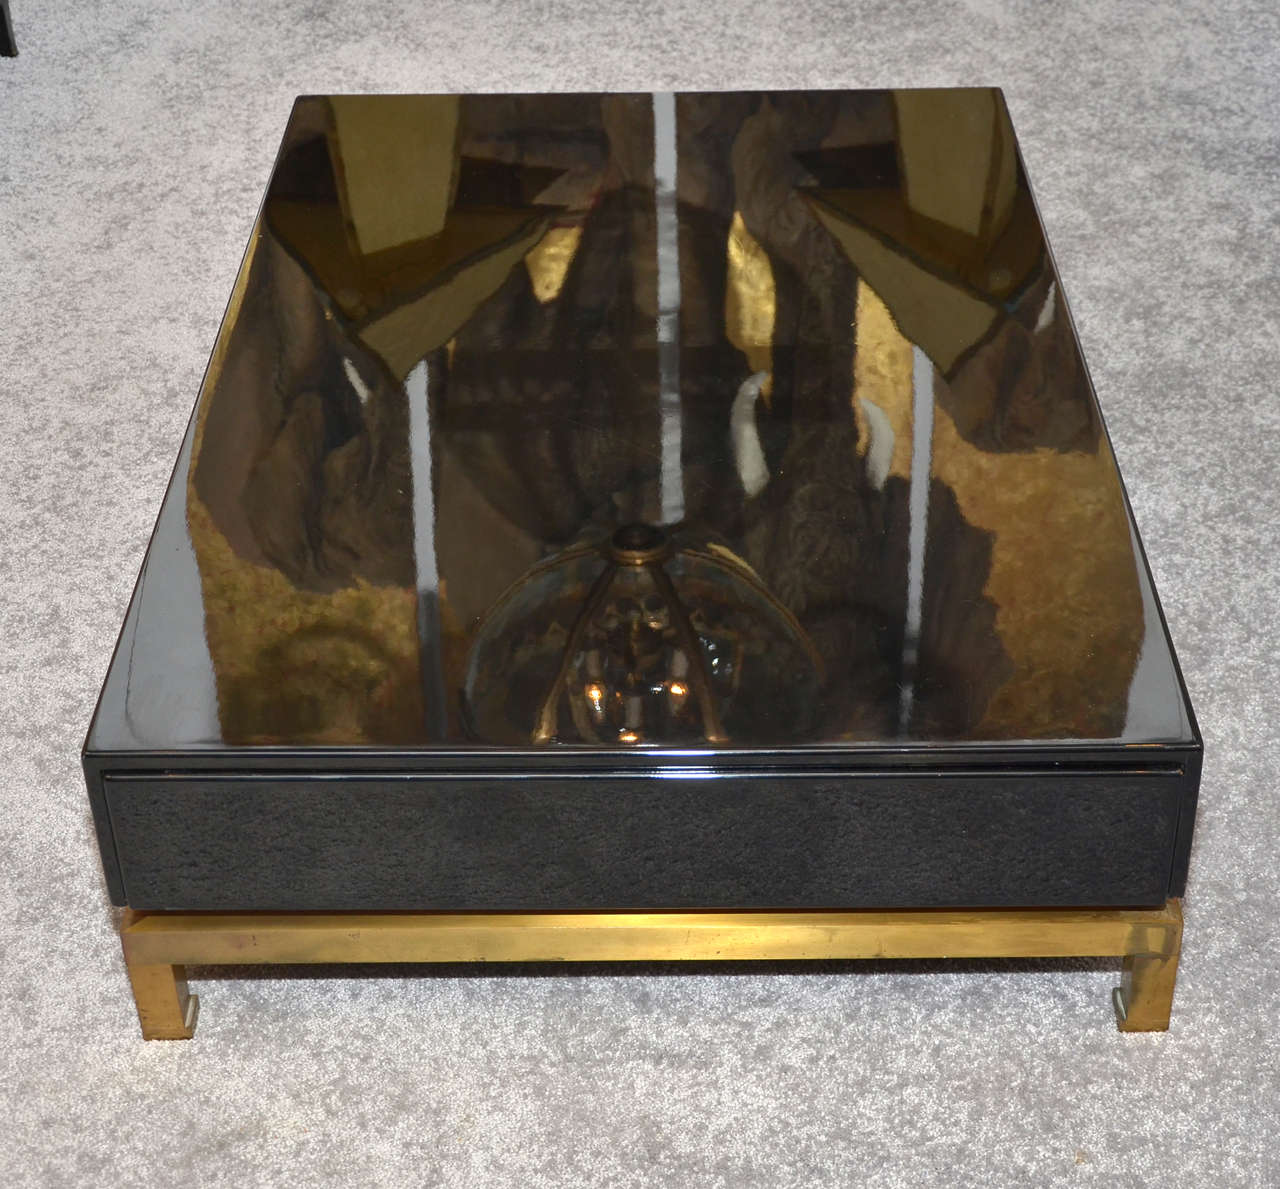 1970s coffee table by Guy Lefèvre for Maison Jansen in black lacquered wood, with one drawer divided in racks on either side; base in gilded patina bronze.